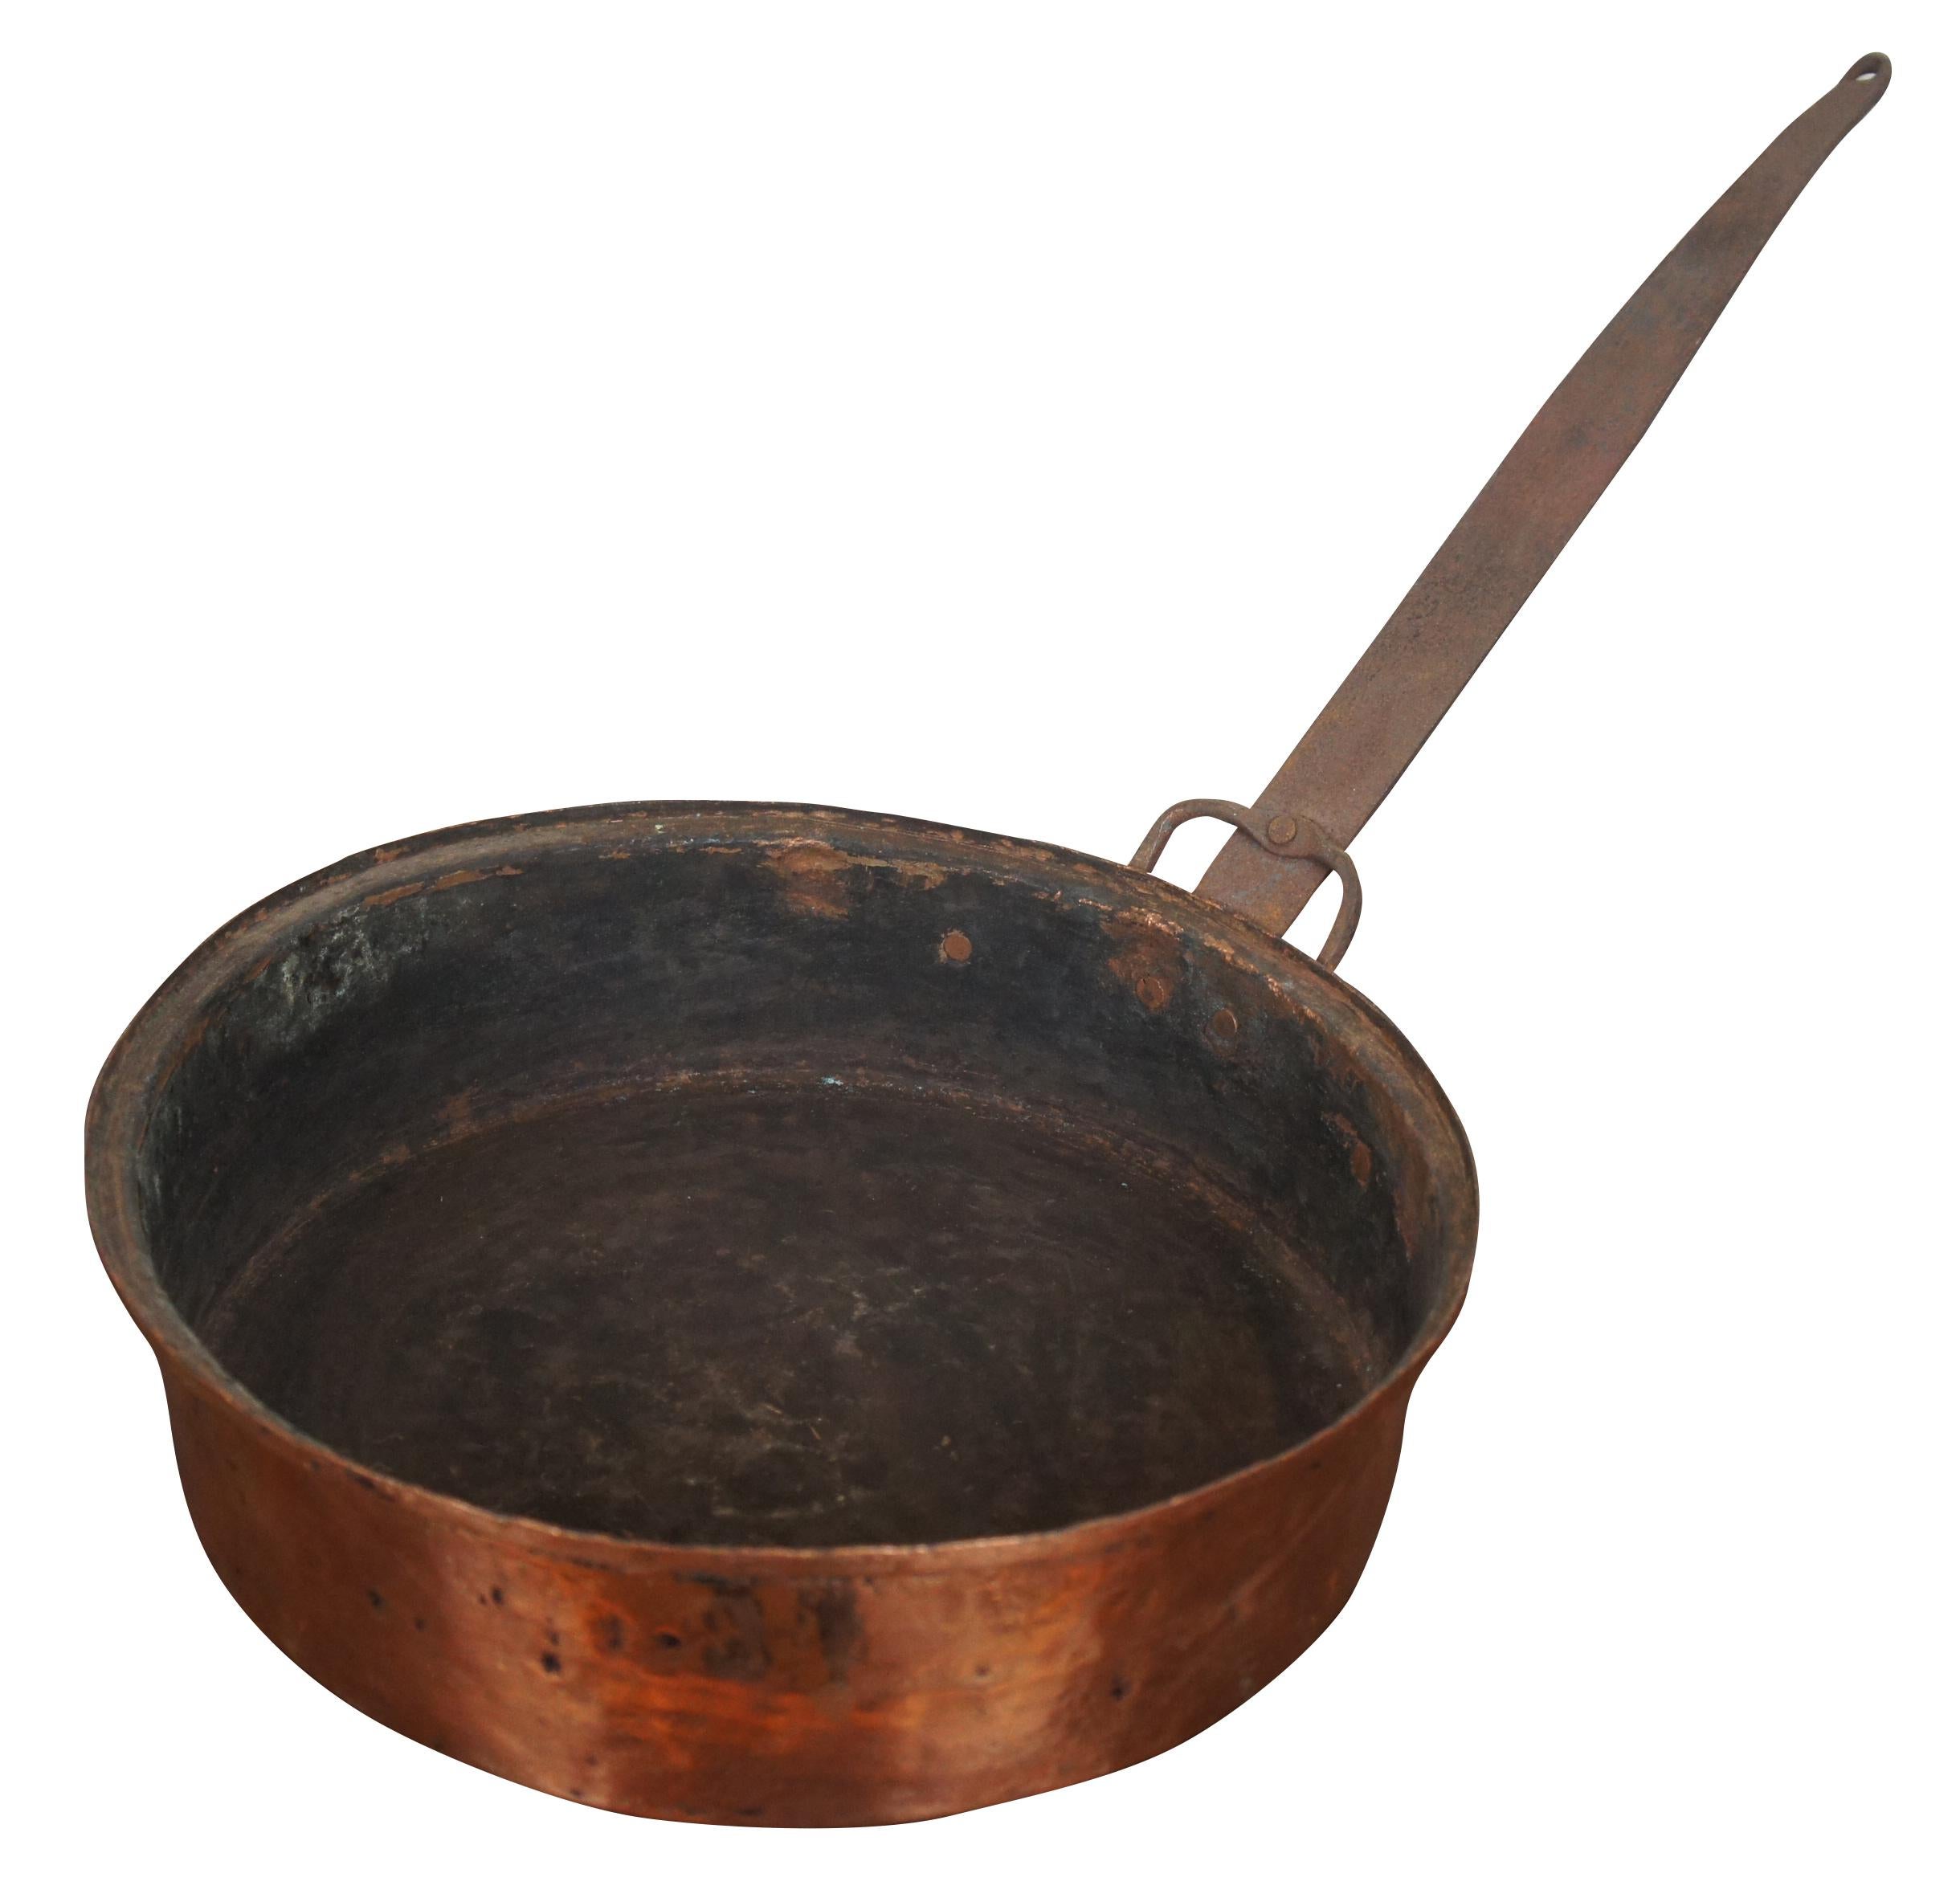 Antique 19th century French hammered copper frying pan featuring forged cast iron handle. Measure: 12